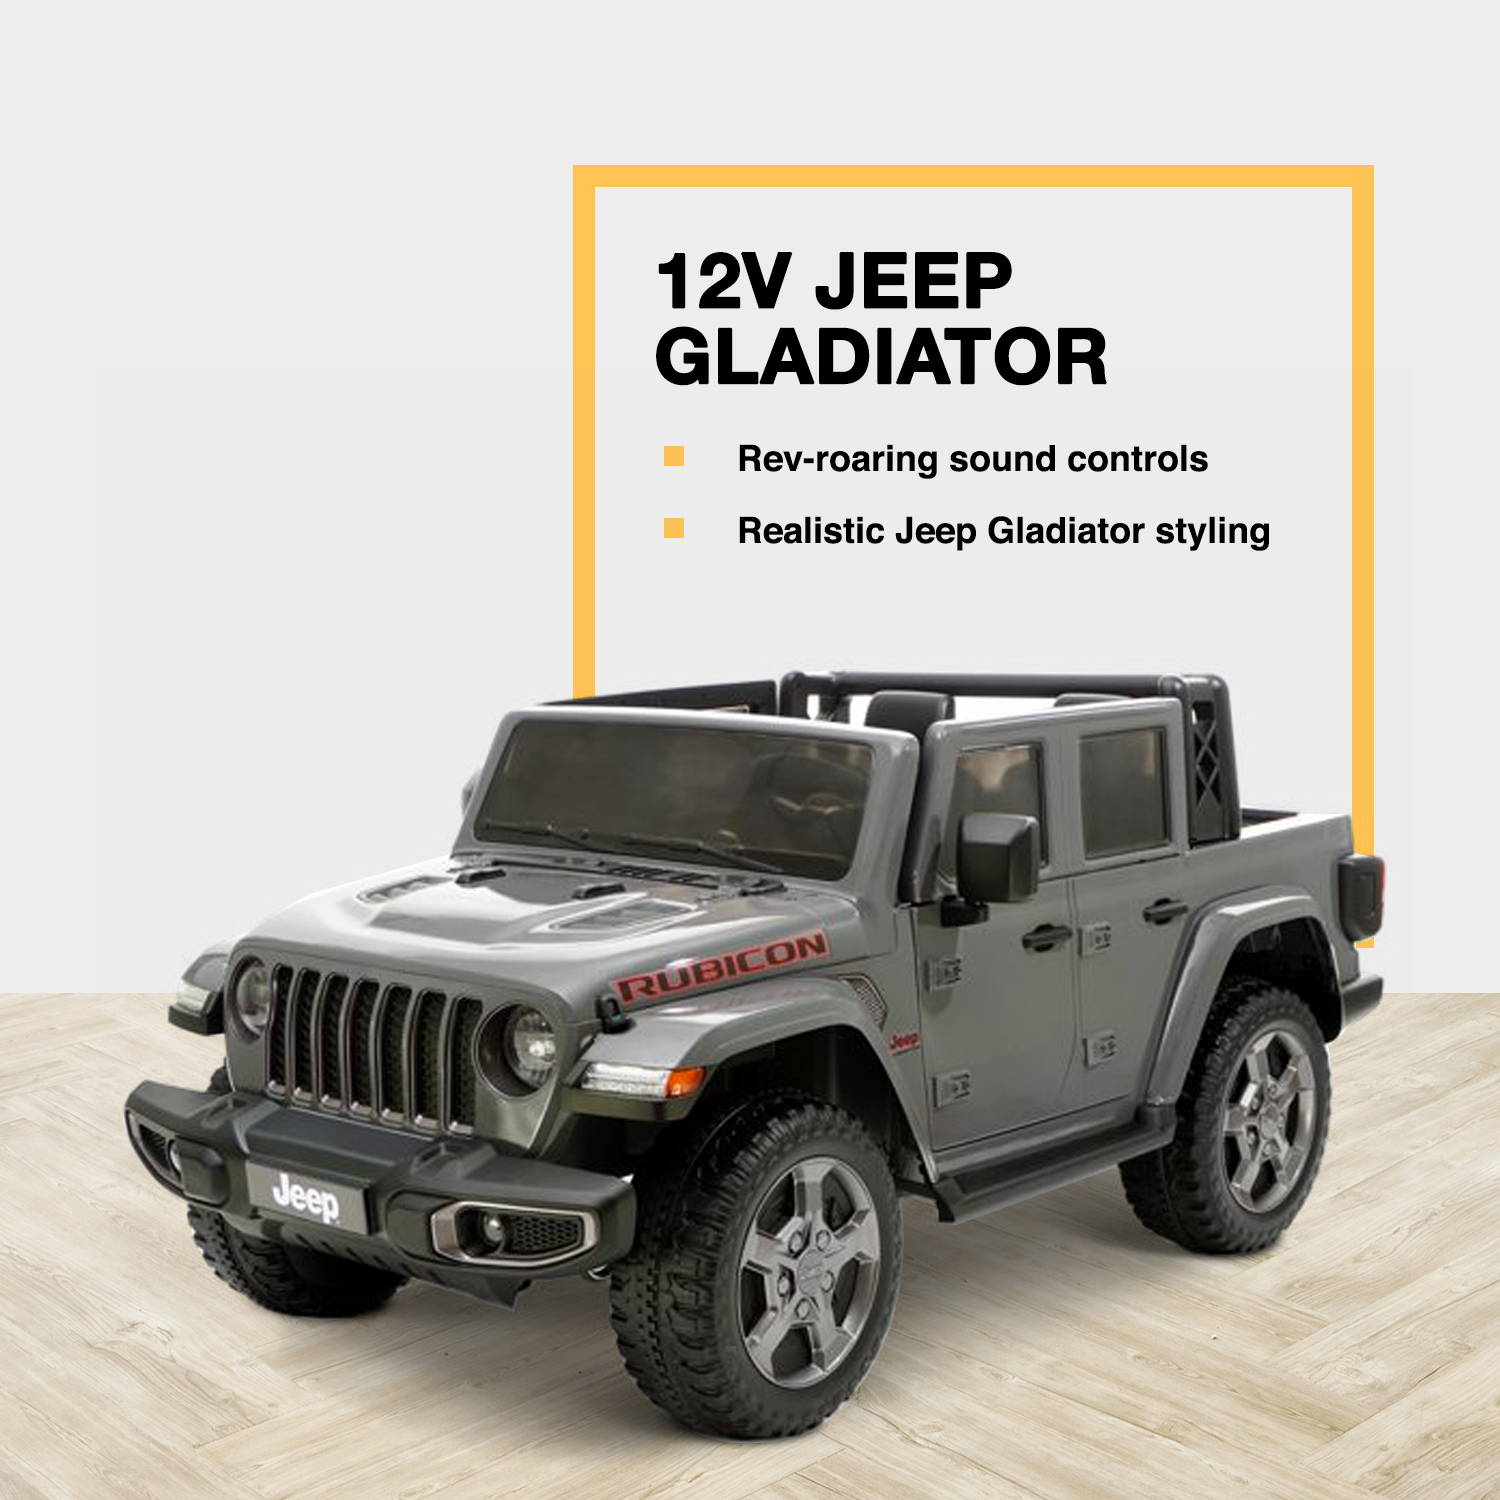 12V Jeep Gladiator Rubicon Battery Powered Ride-on by Hyper Toys, 2-Seater, Gray, for a Child Ages 3-8, Max Speed 5 mph - image 4 of 15